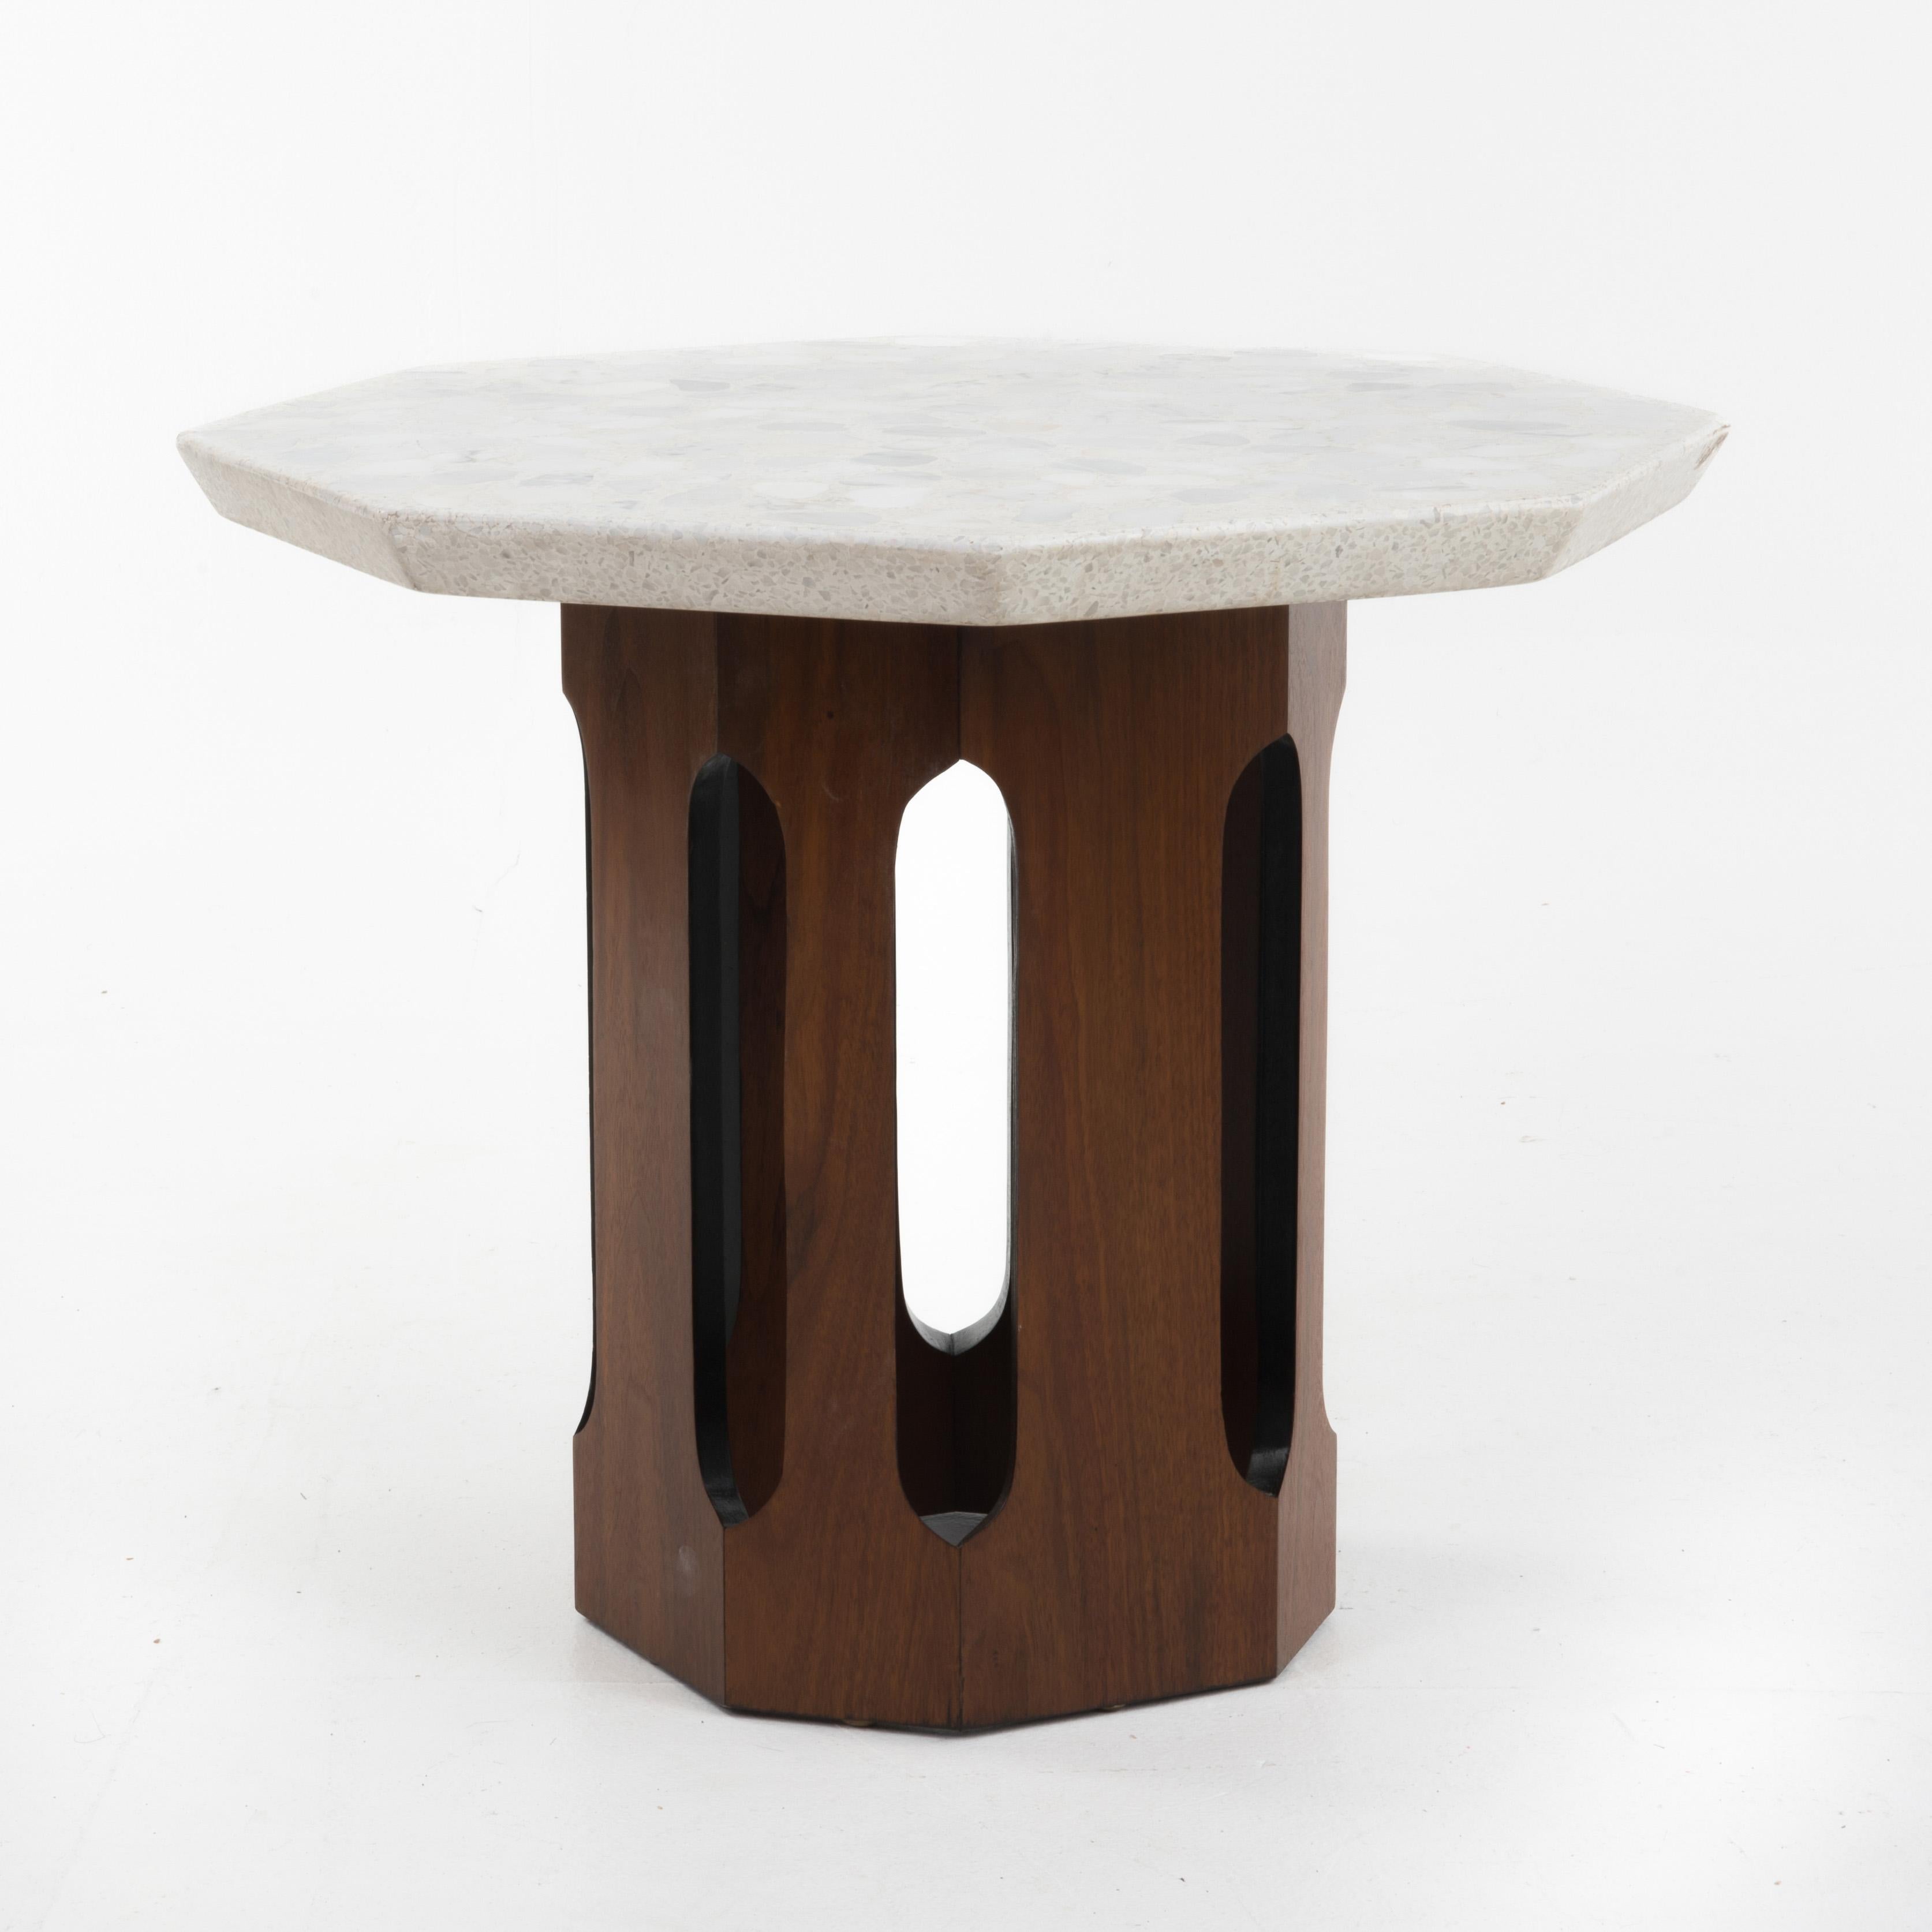 Mid-20th Century Harvey Probber Terrazzo Travertine Stone Walnut Side Tables Octagon - A Pair For Sale